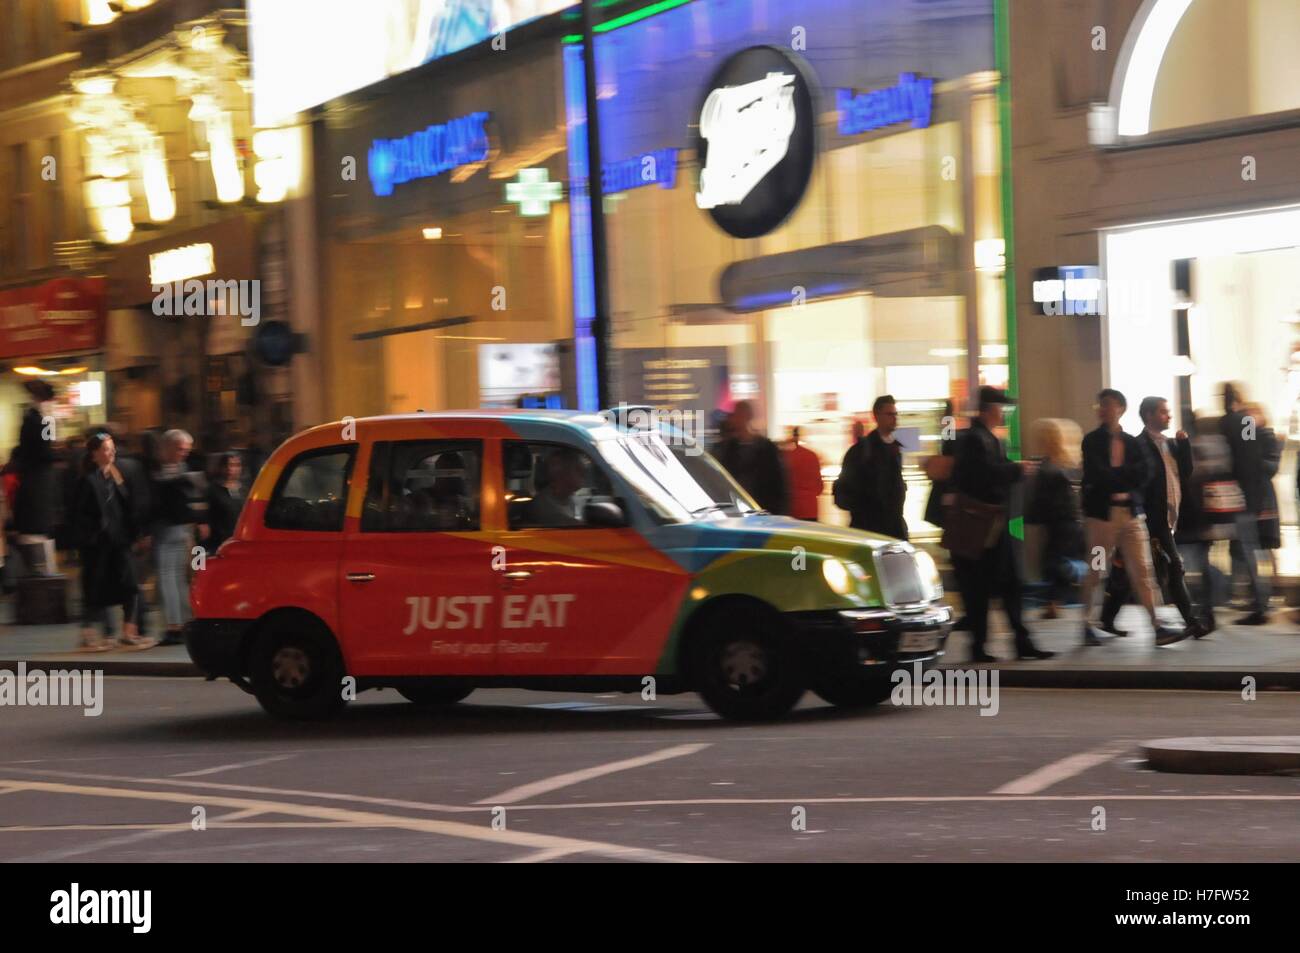 Ein Londoner Taxi nachts im Piccadilly Circus, UK. Stockfoto